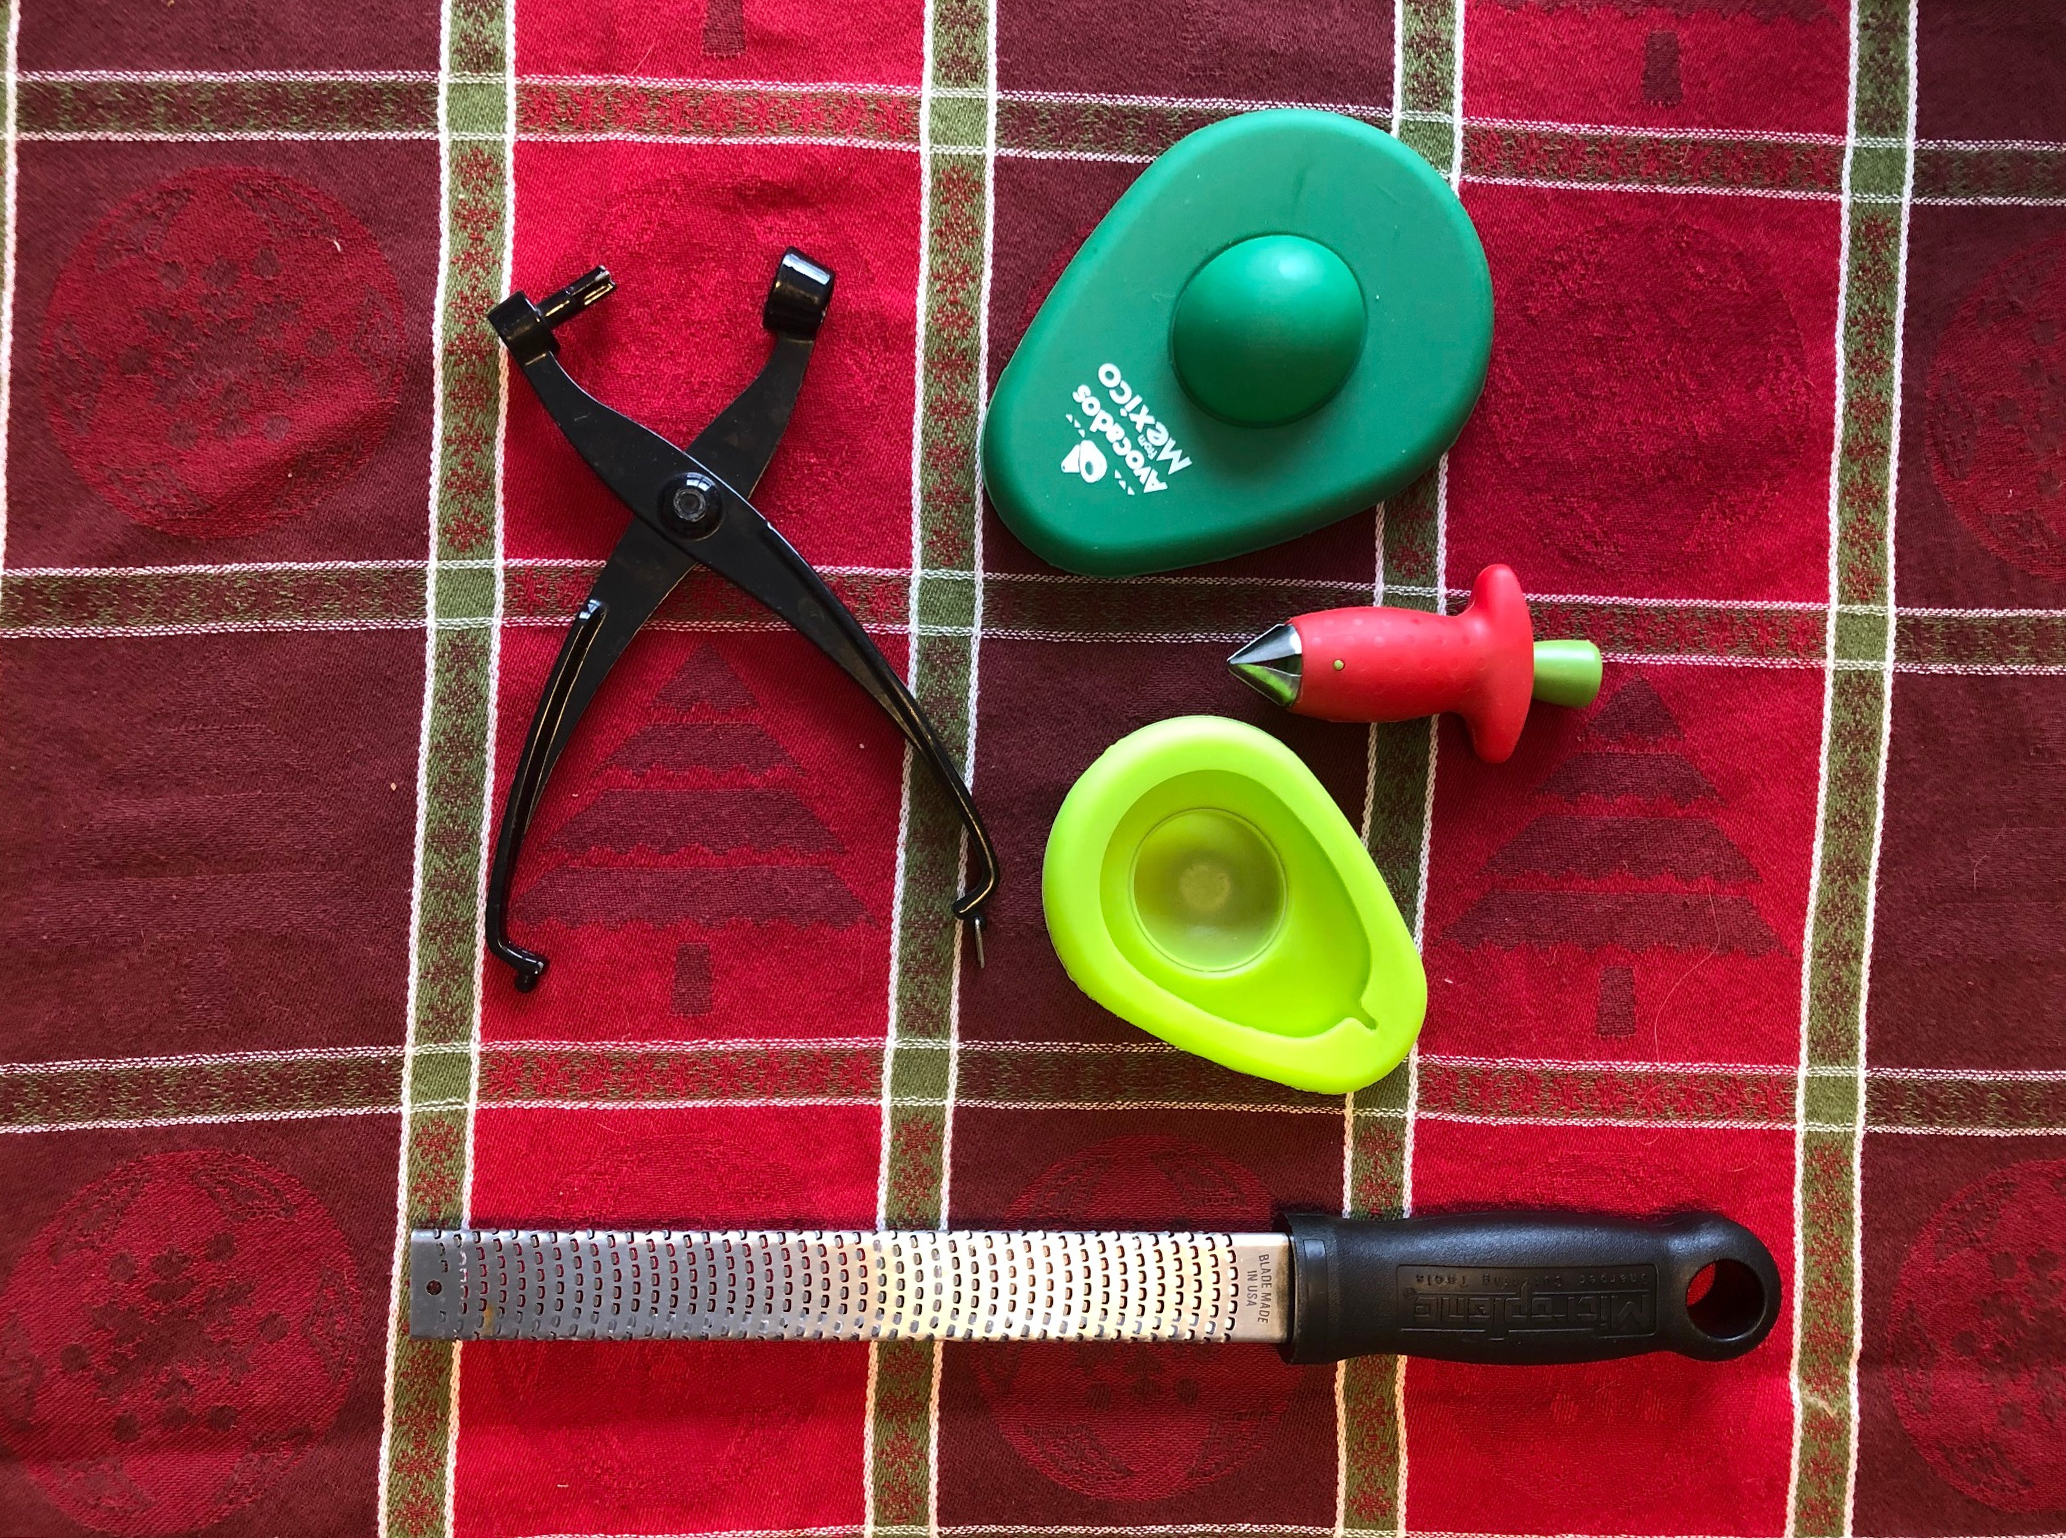 A cherry pitter, an avocado keeper, a strawberry huller and a Microplane.